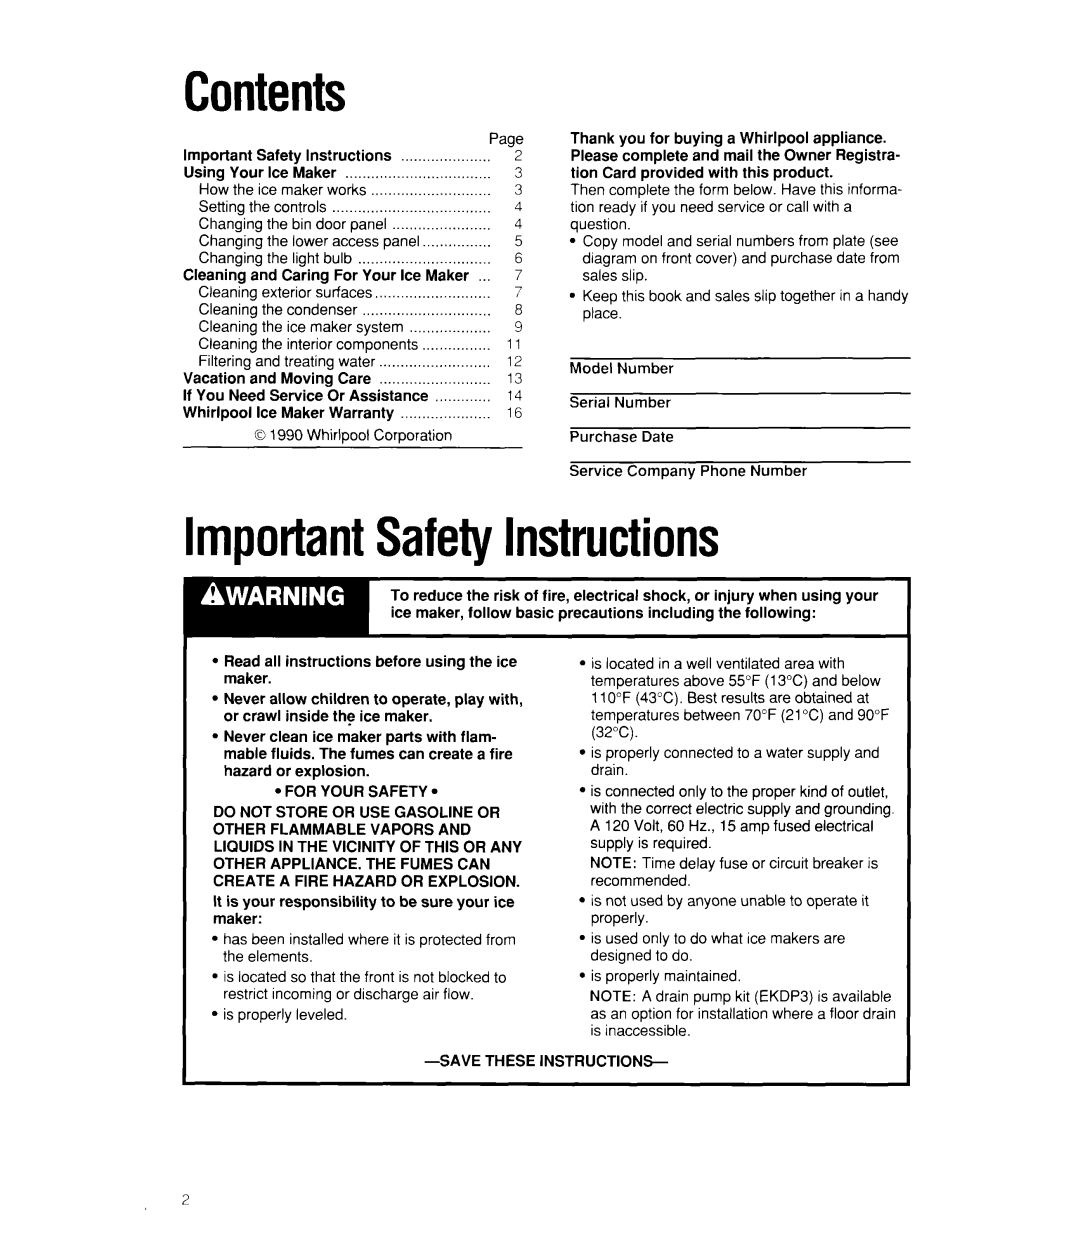 Whirlpool EC510 manual Contents, ImportantSafetyInstructions 